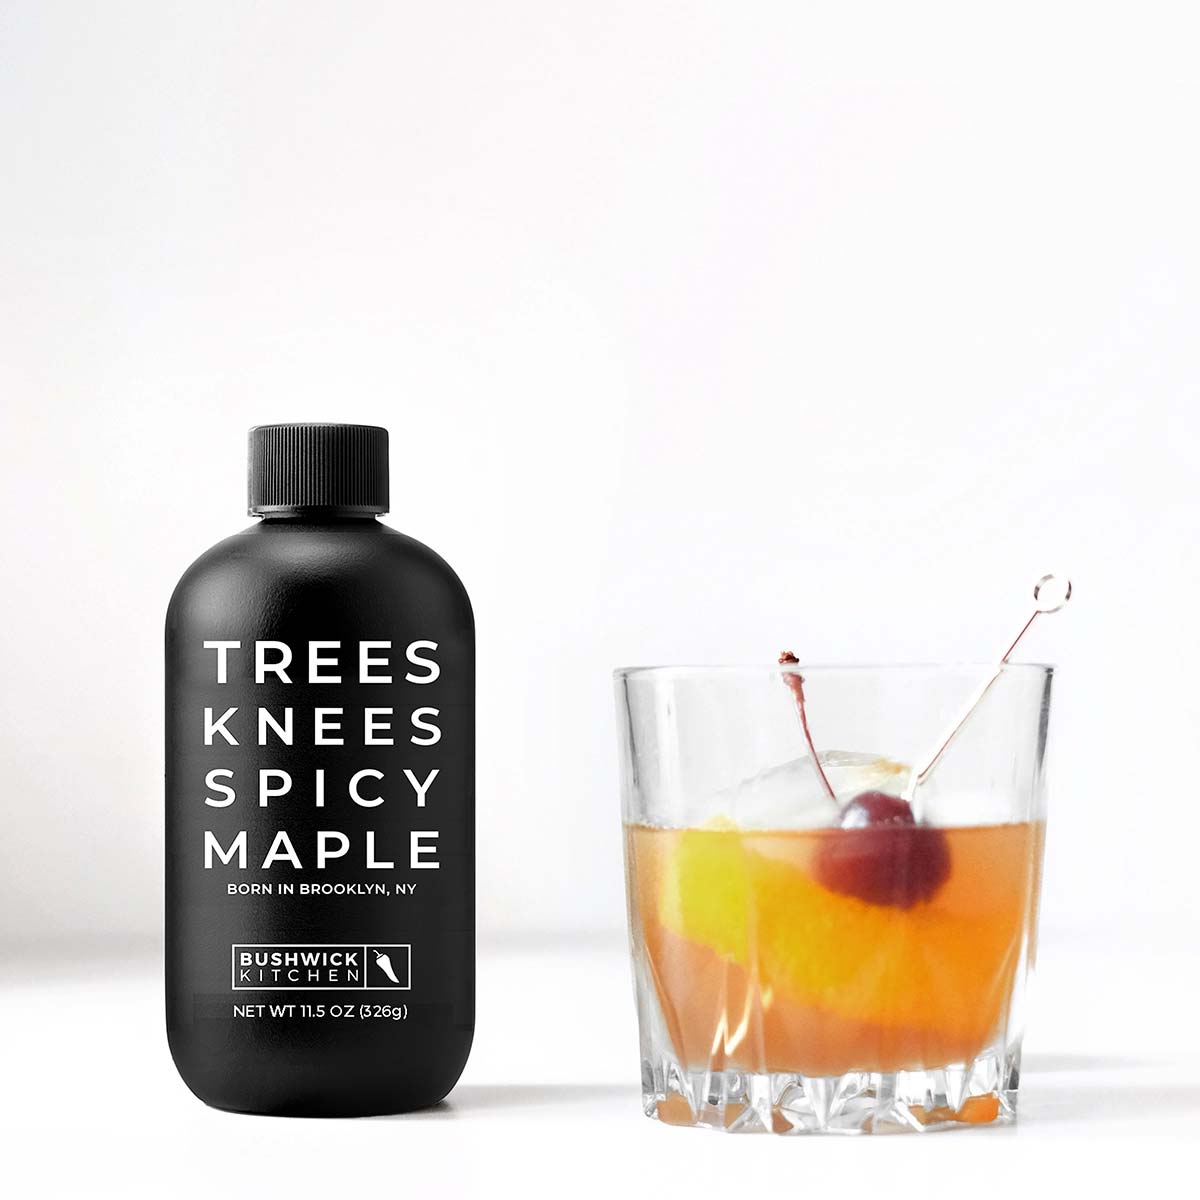 bushwick kitchen trees knees spicy maple syrup